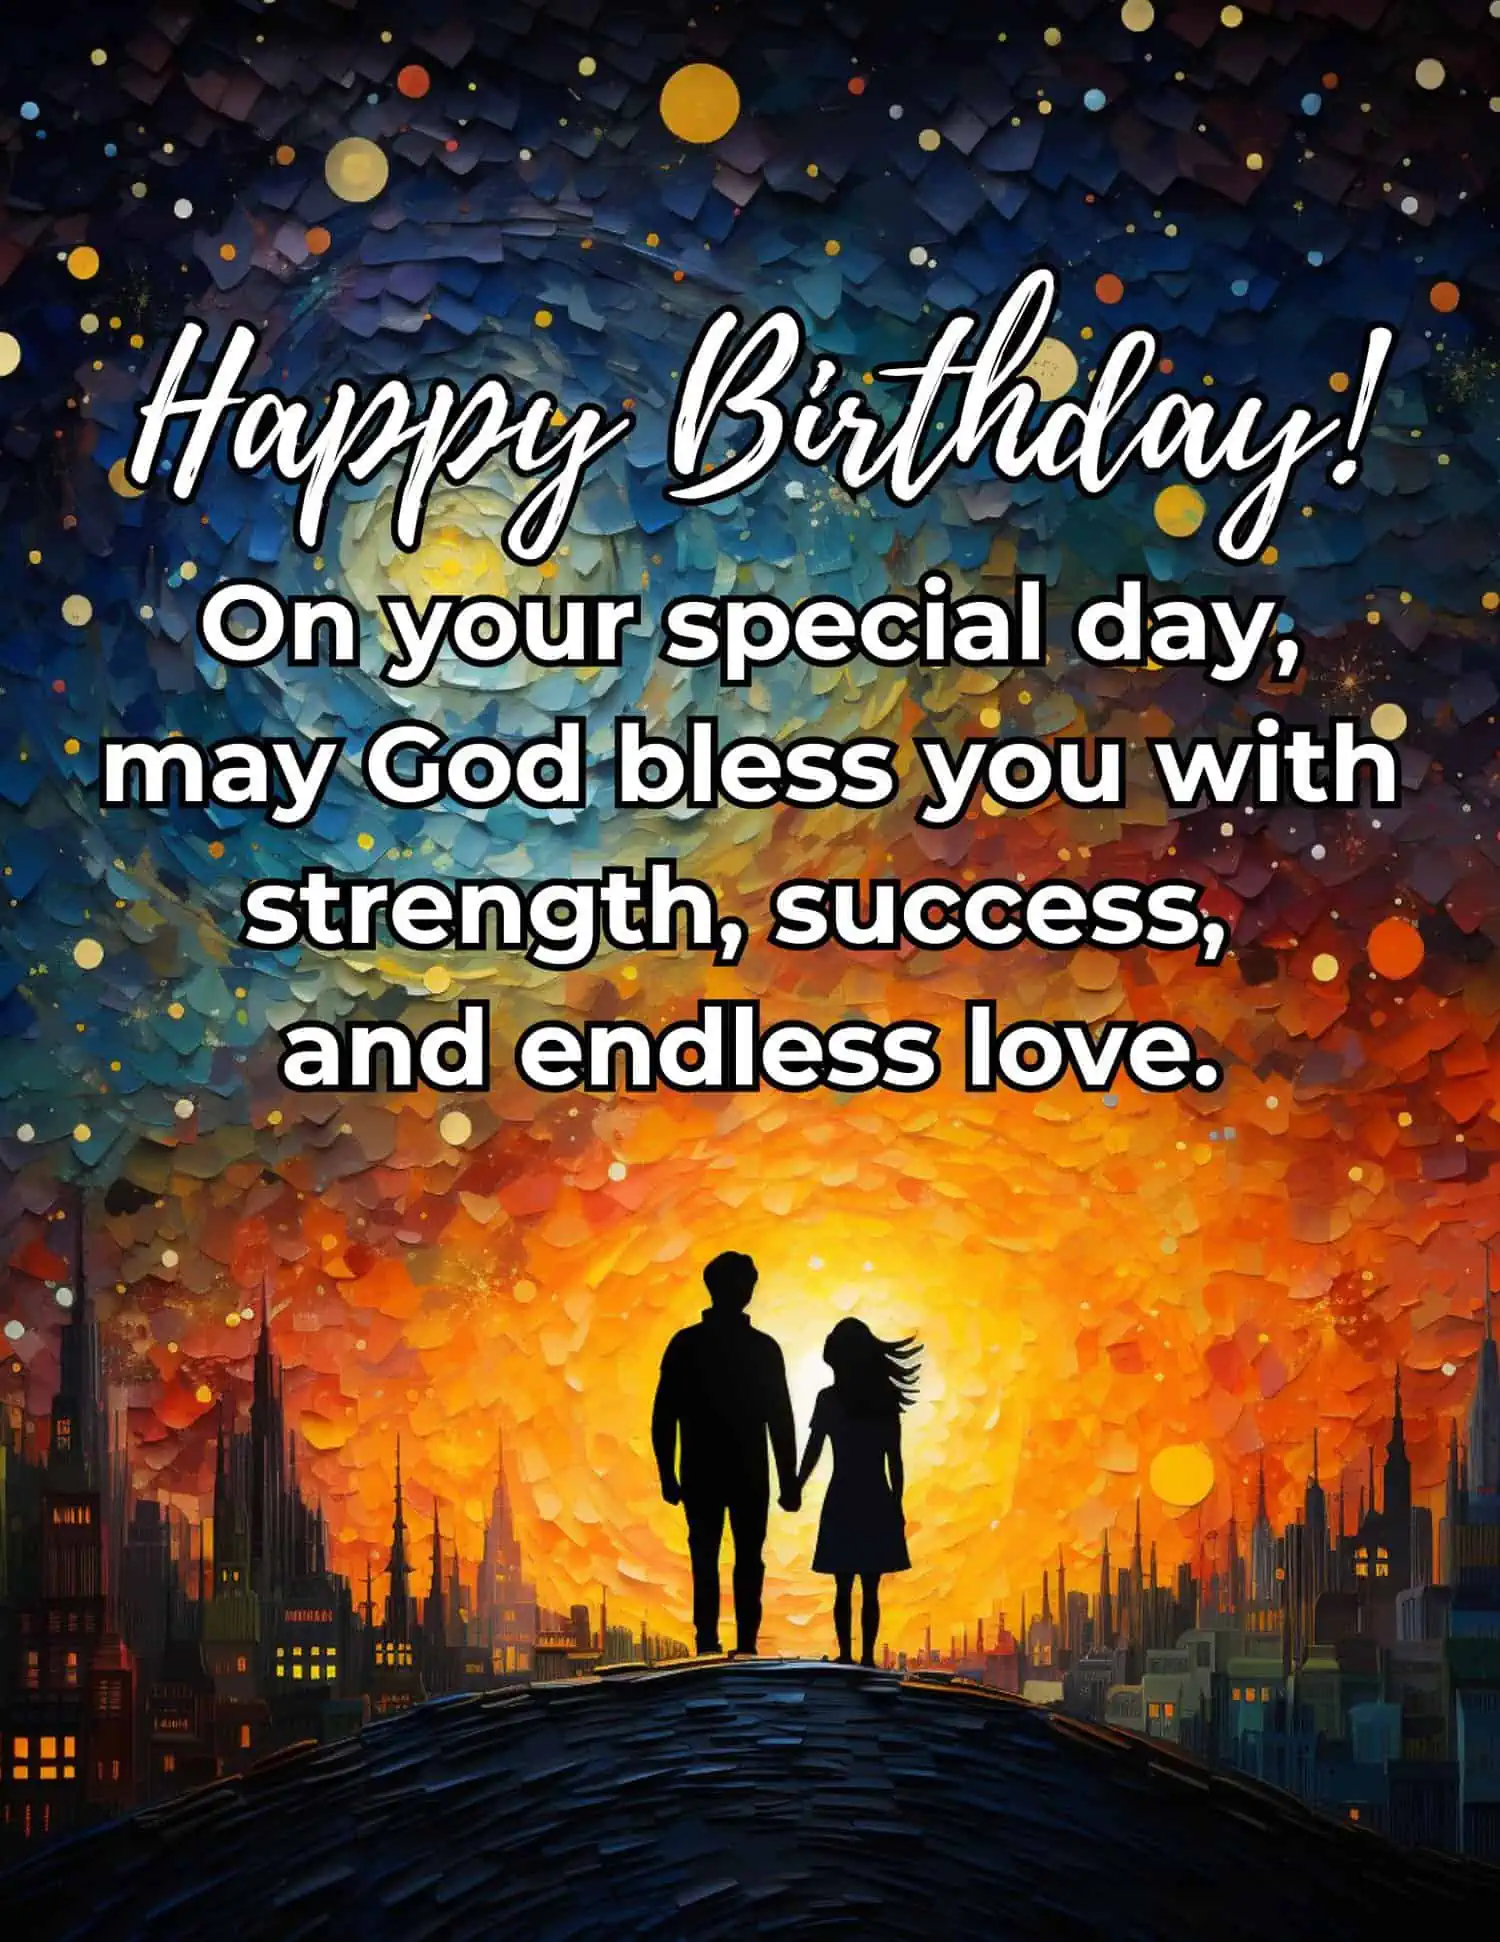 A heartfelt collection of birthday prayers and blessings tailored for a boyfriend or husband, perfect for expressing love, hope, and devotion.